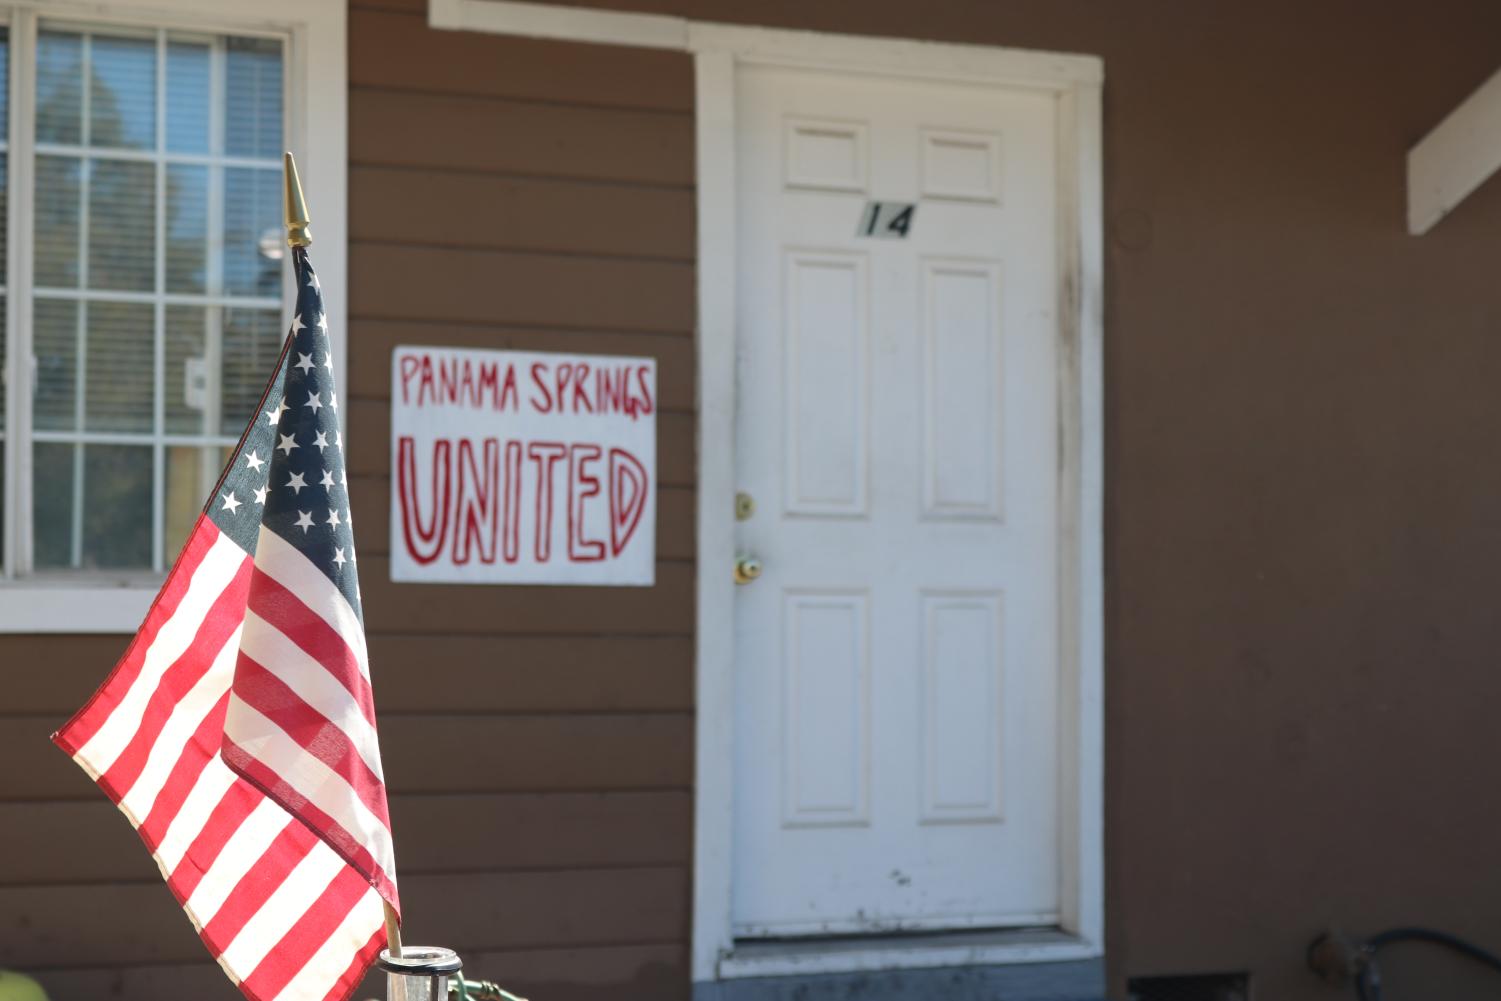 American flag and sign on wall reading "Panama Springs United"